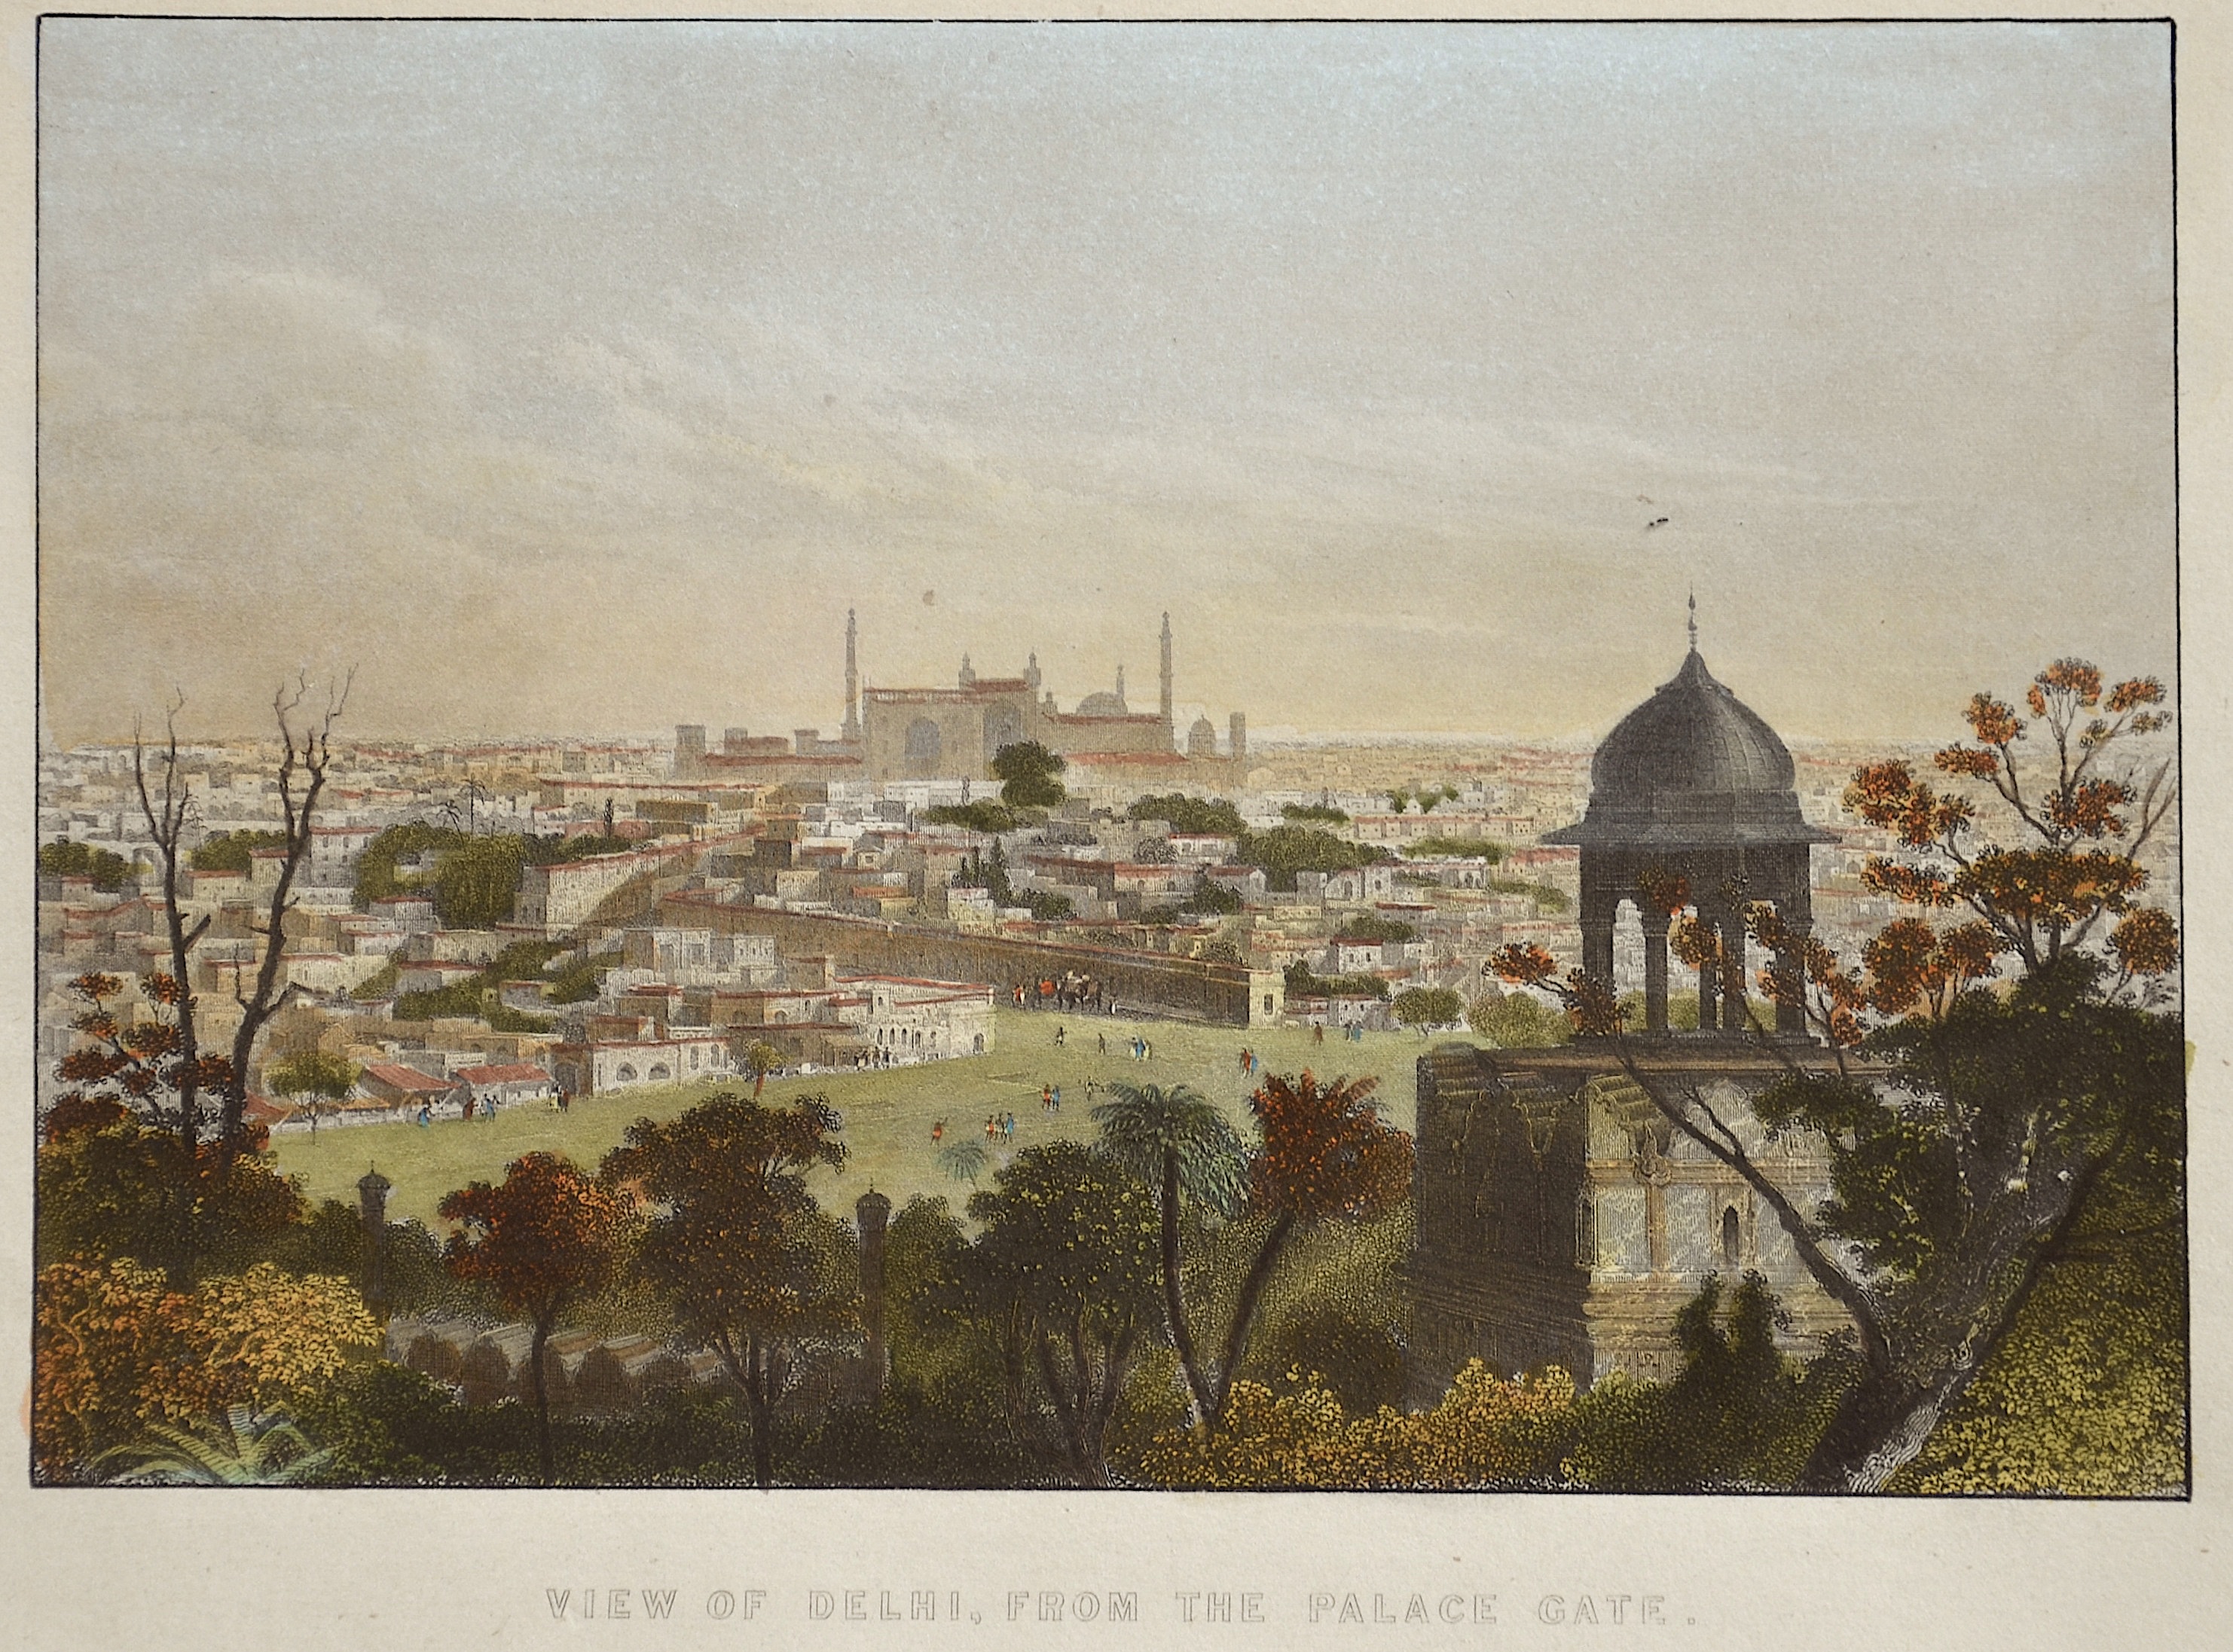 Anonymus  View of Delhi from the palace gate